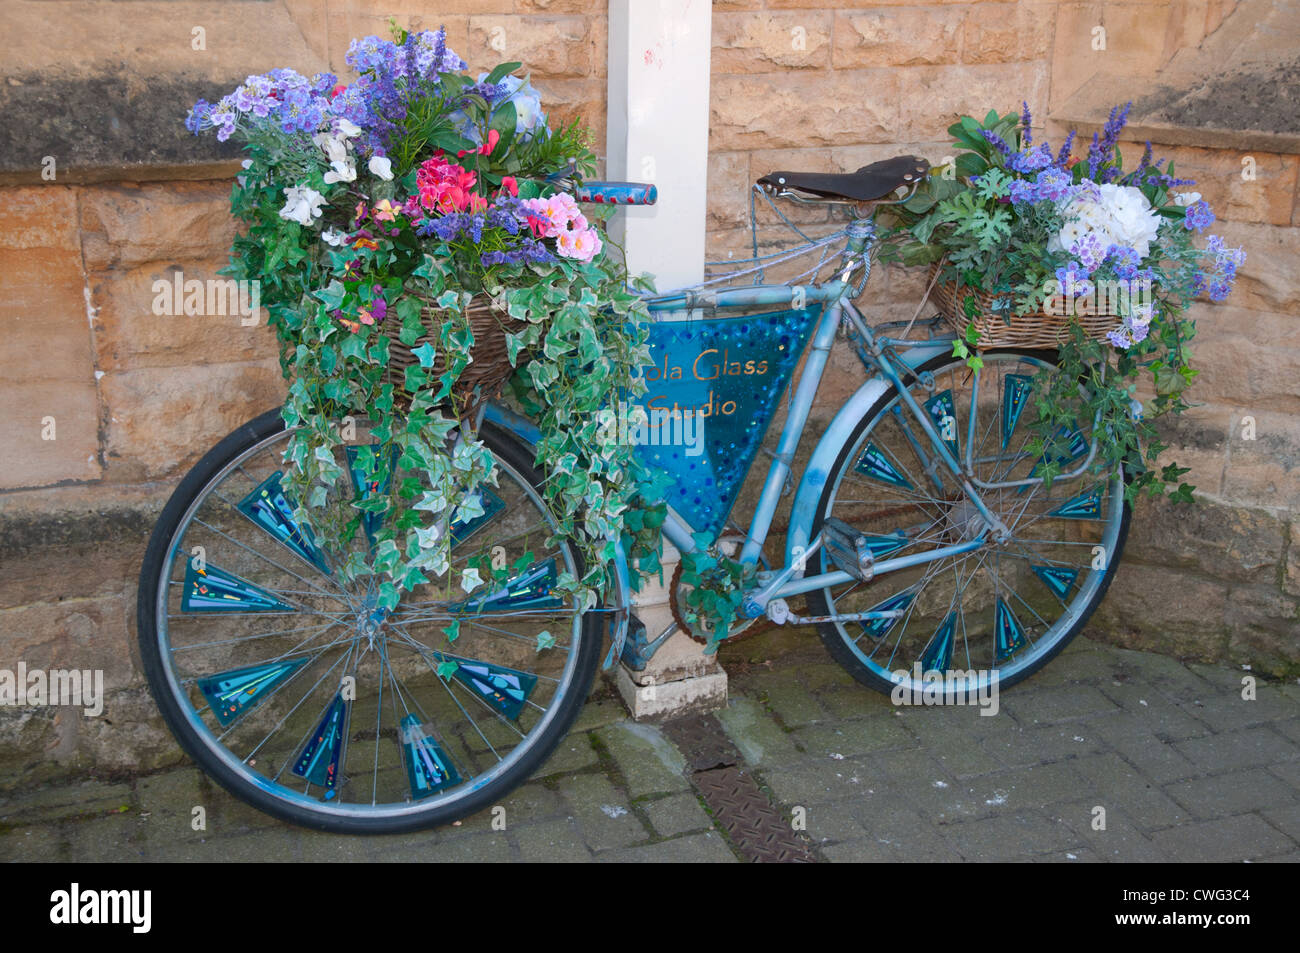 Bicycle decorated with flowers outside Jola Glass Studio on Lower High Street Chipping Campden Goucestershire Cotswolds England Stock Photo